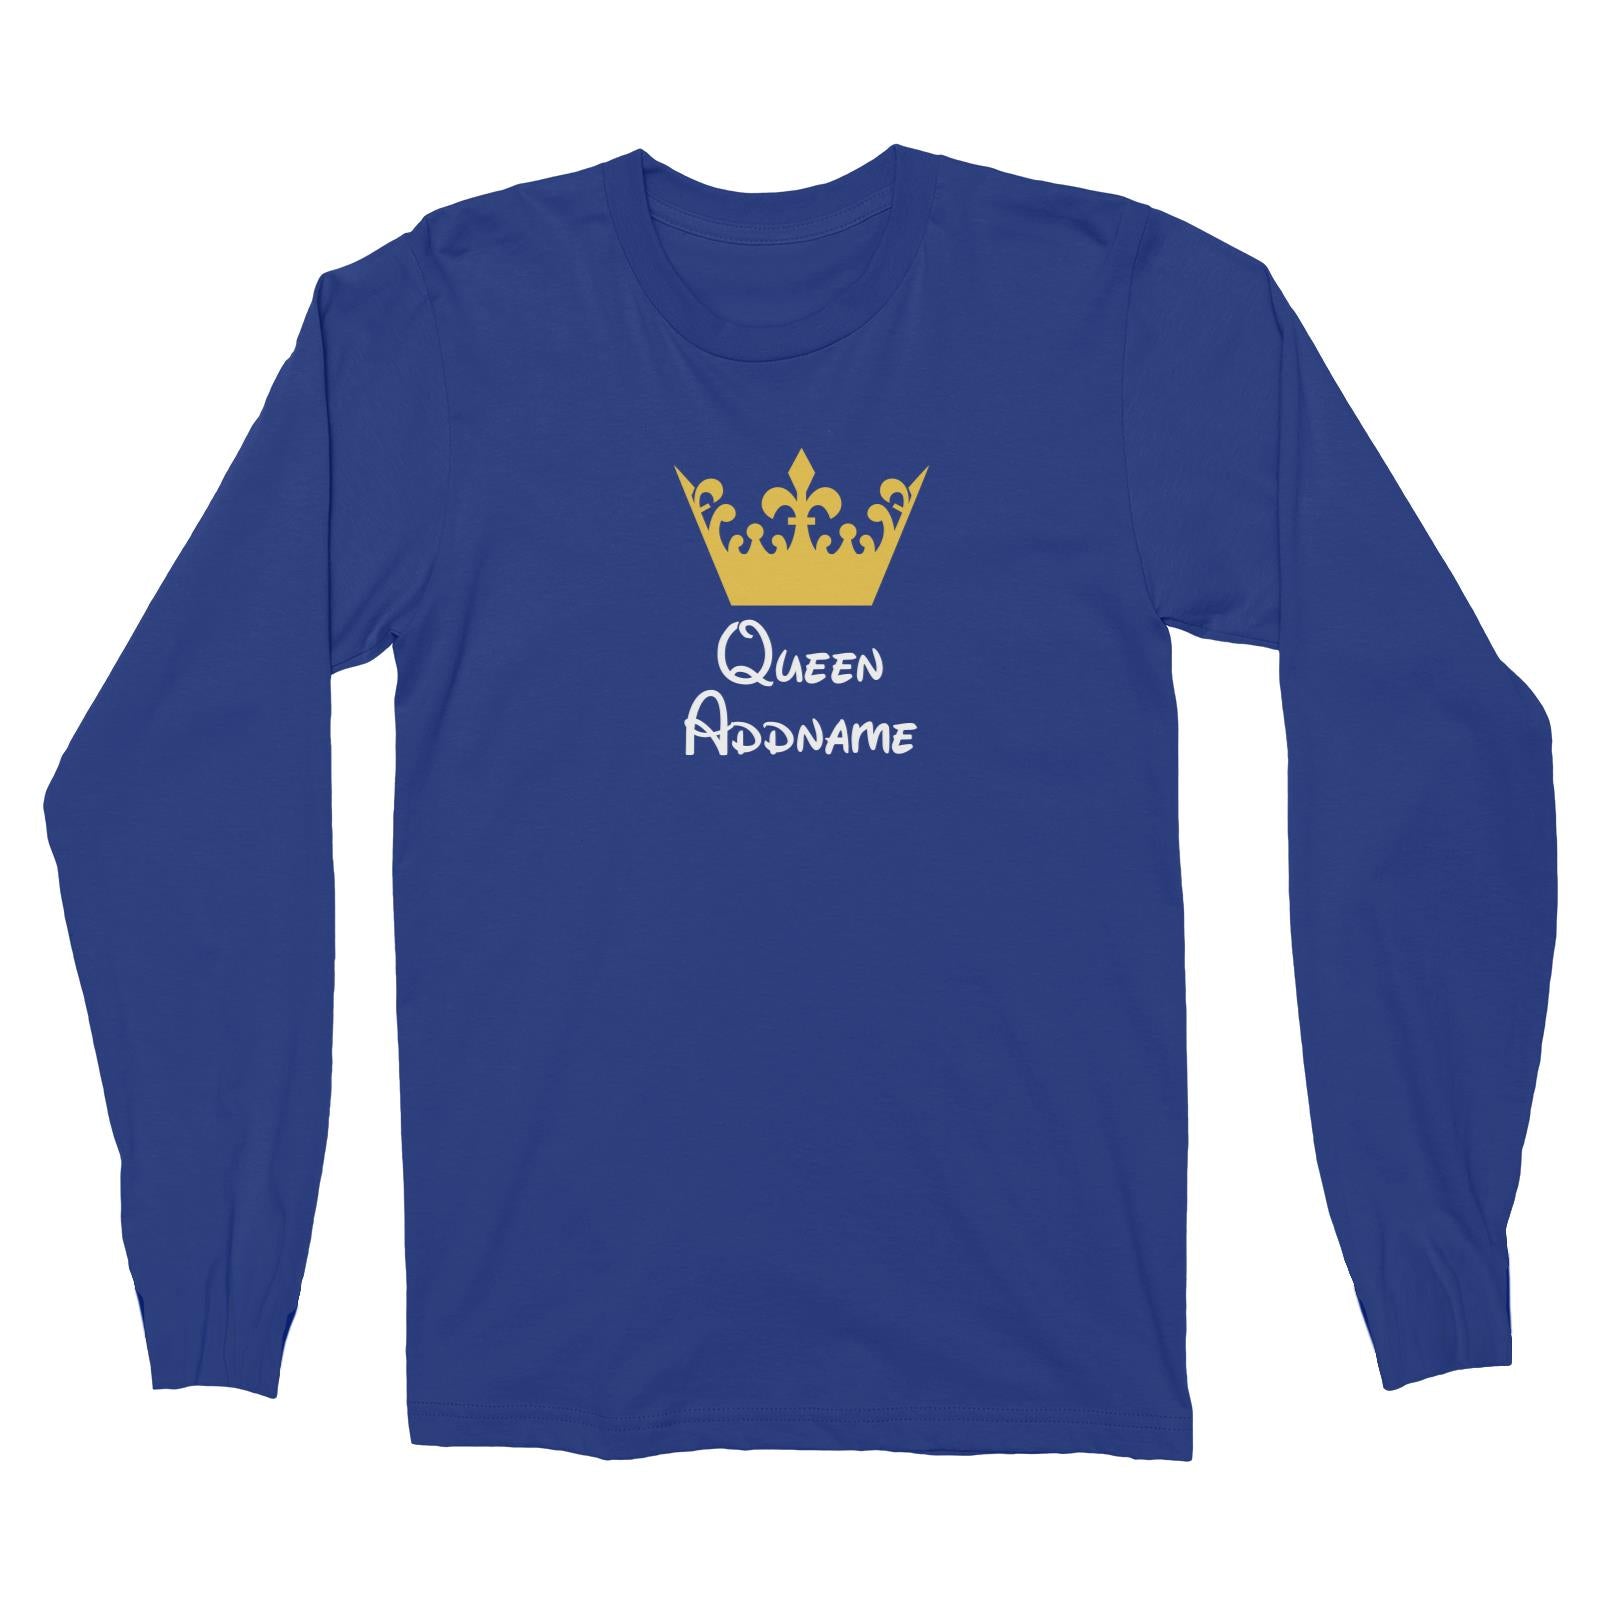 Royal Queen with Tiara Addname Long Sleeve Unisex T-Shirt